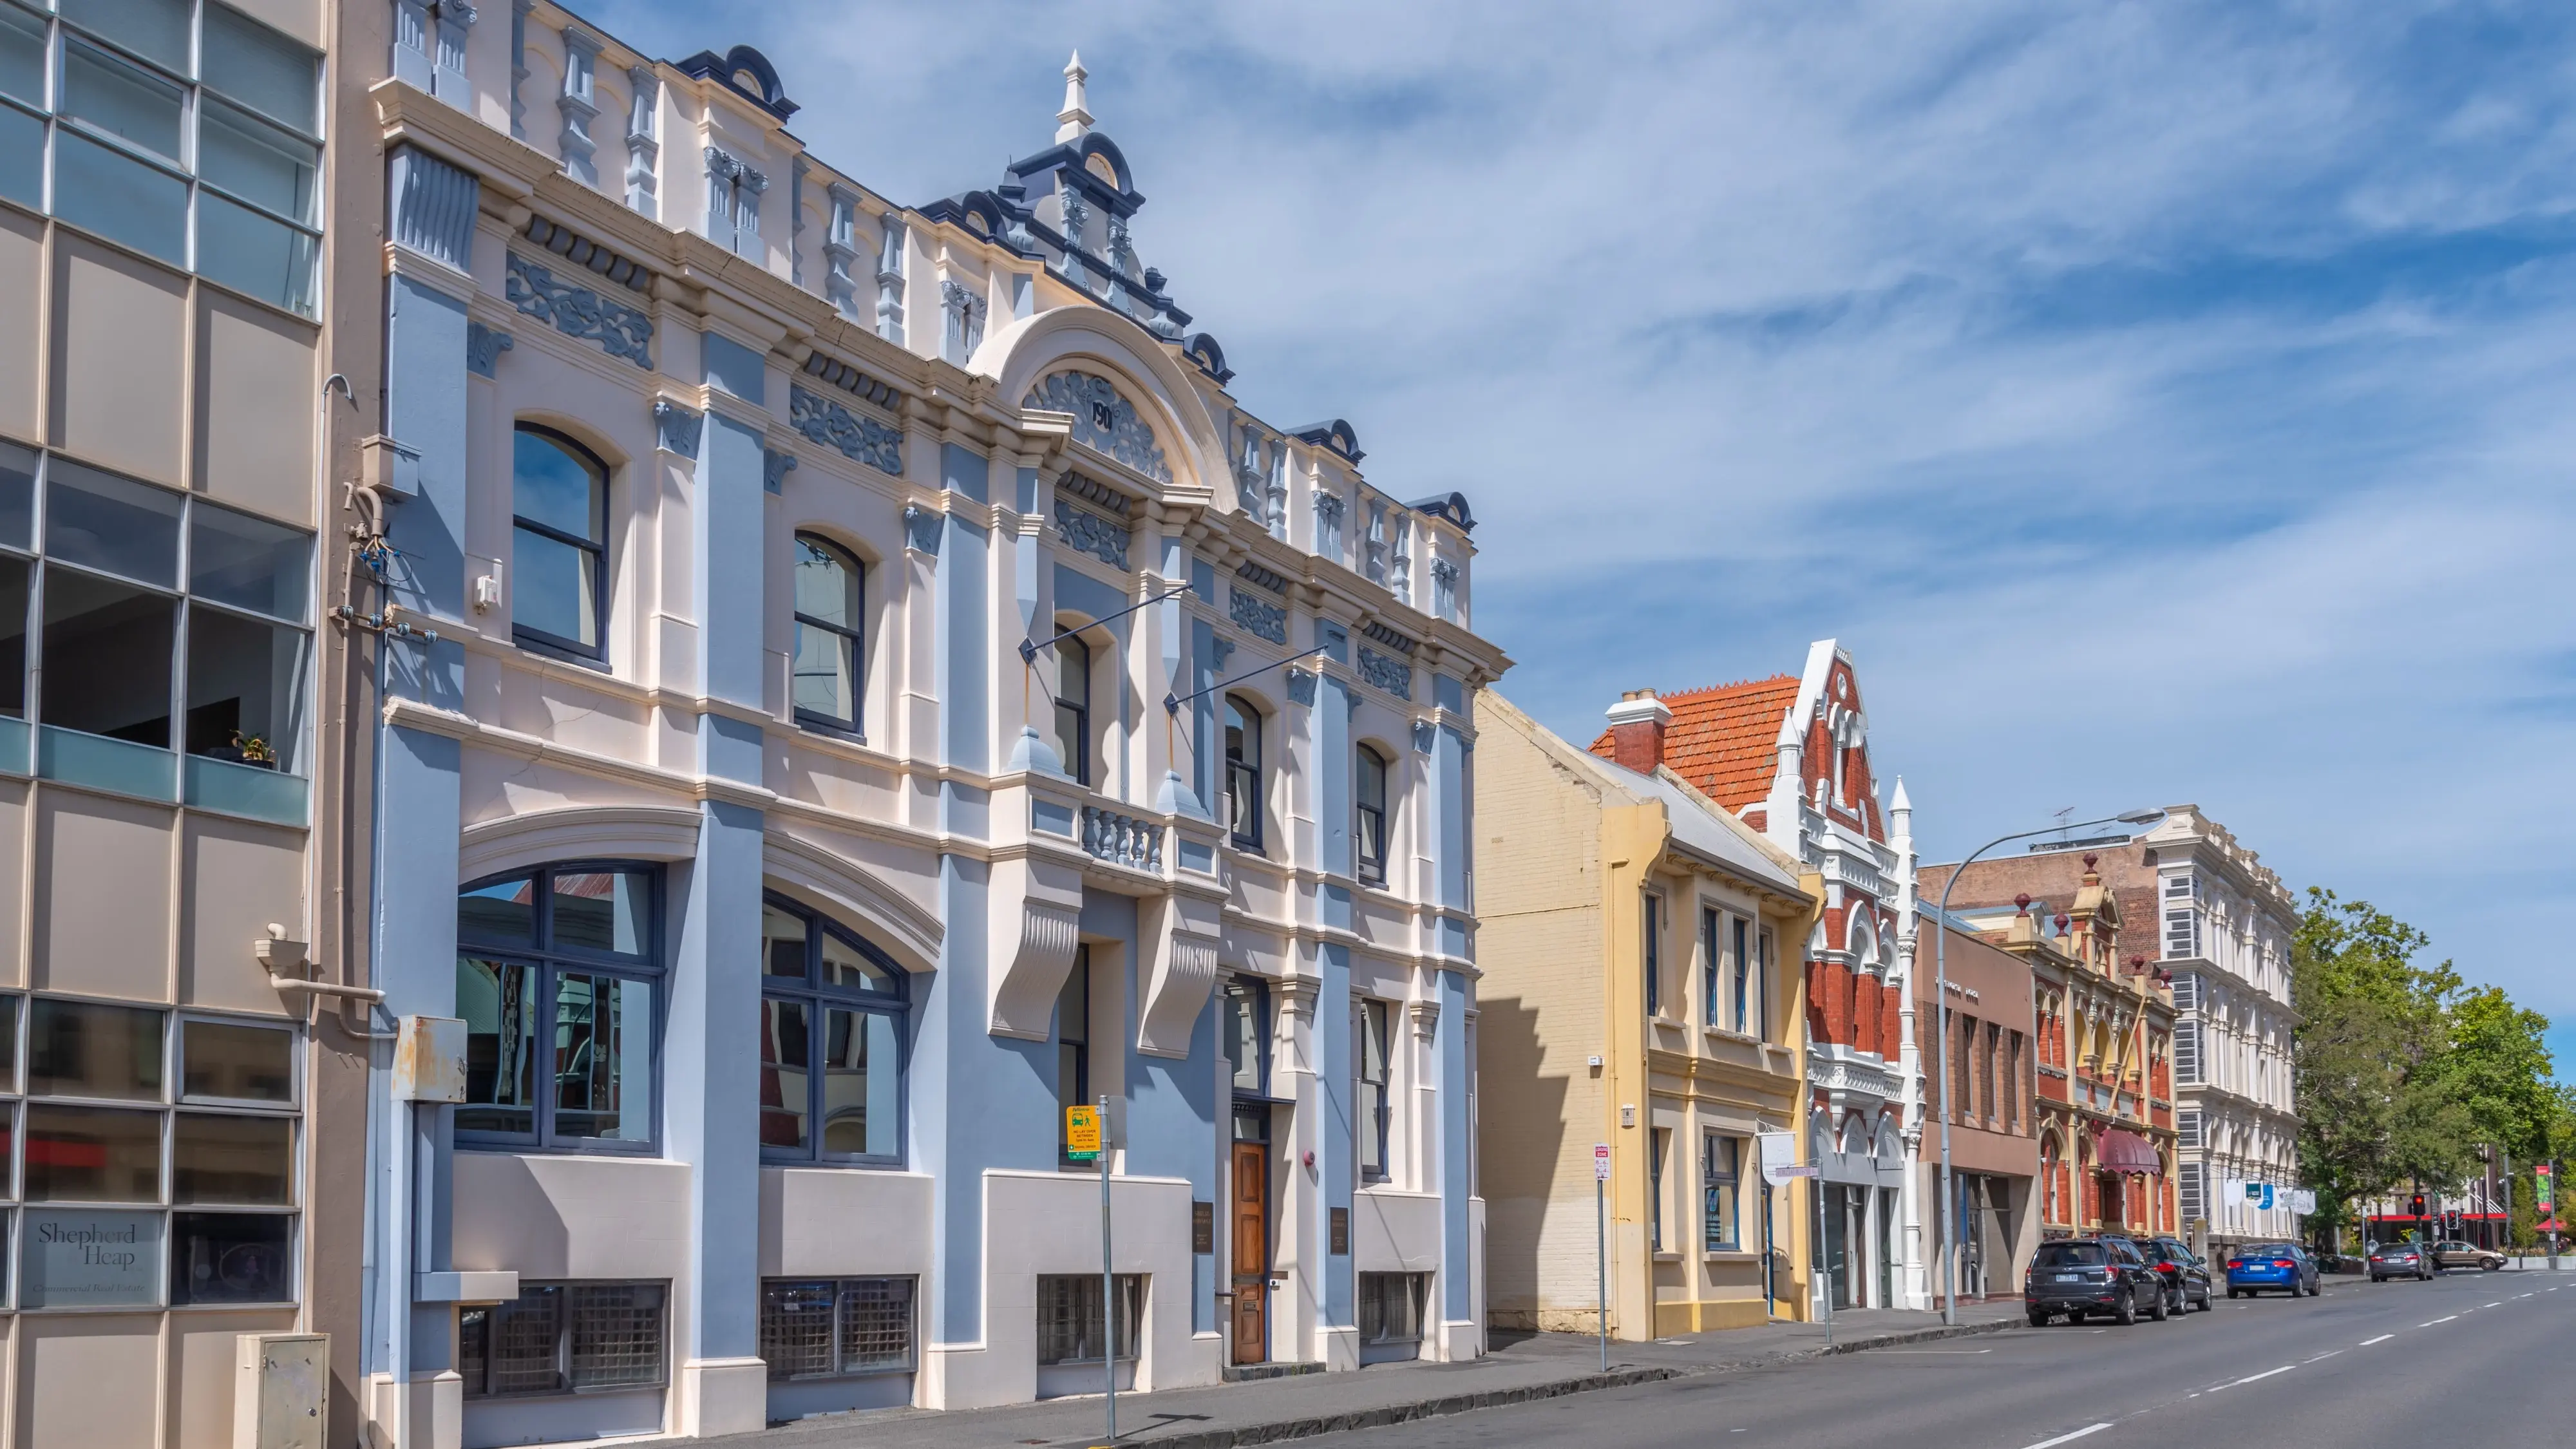 A street of perfectly preserved historic buildings in central Launceston. Image credit: stock.adobe.com